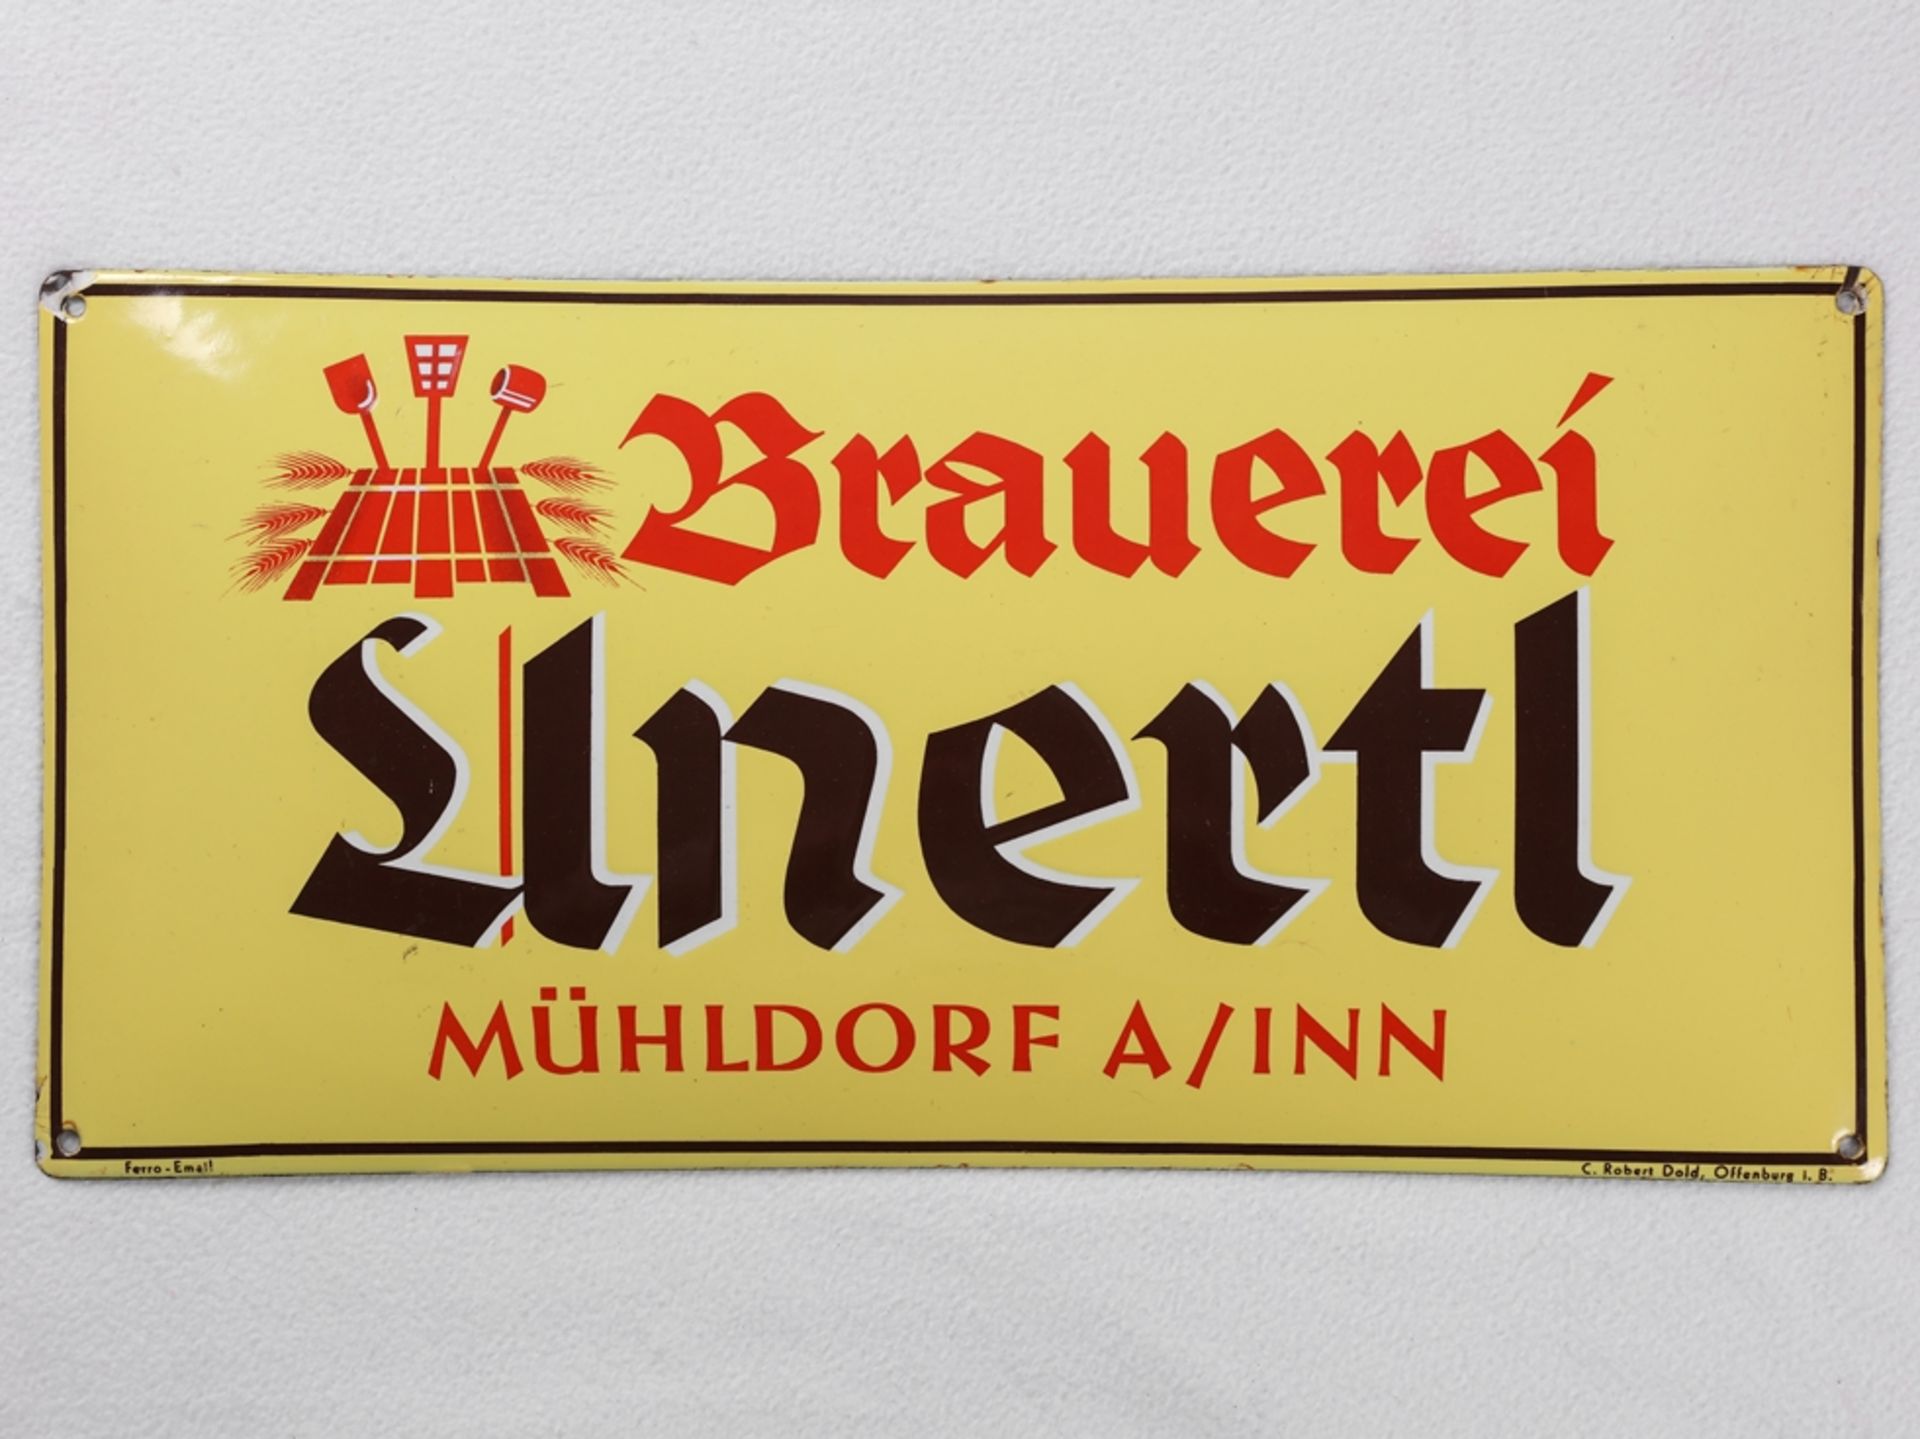 Enamel sign for the Unertl brewery, wheat beer, Mühldorf am Inn, around 1930 - Image 7 of 7